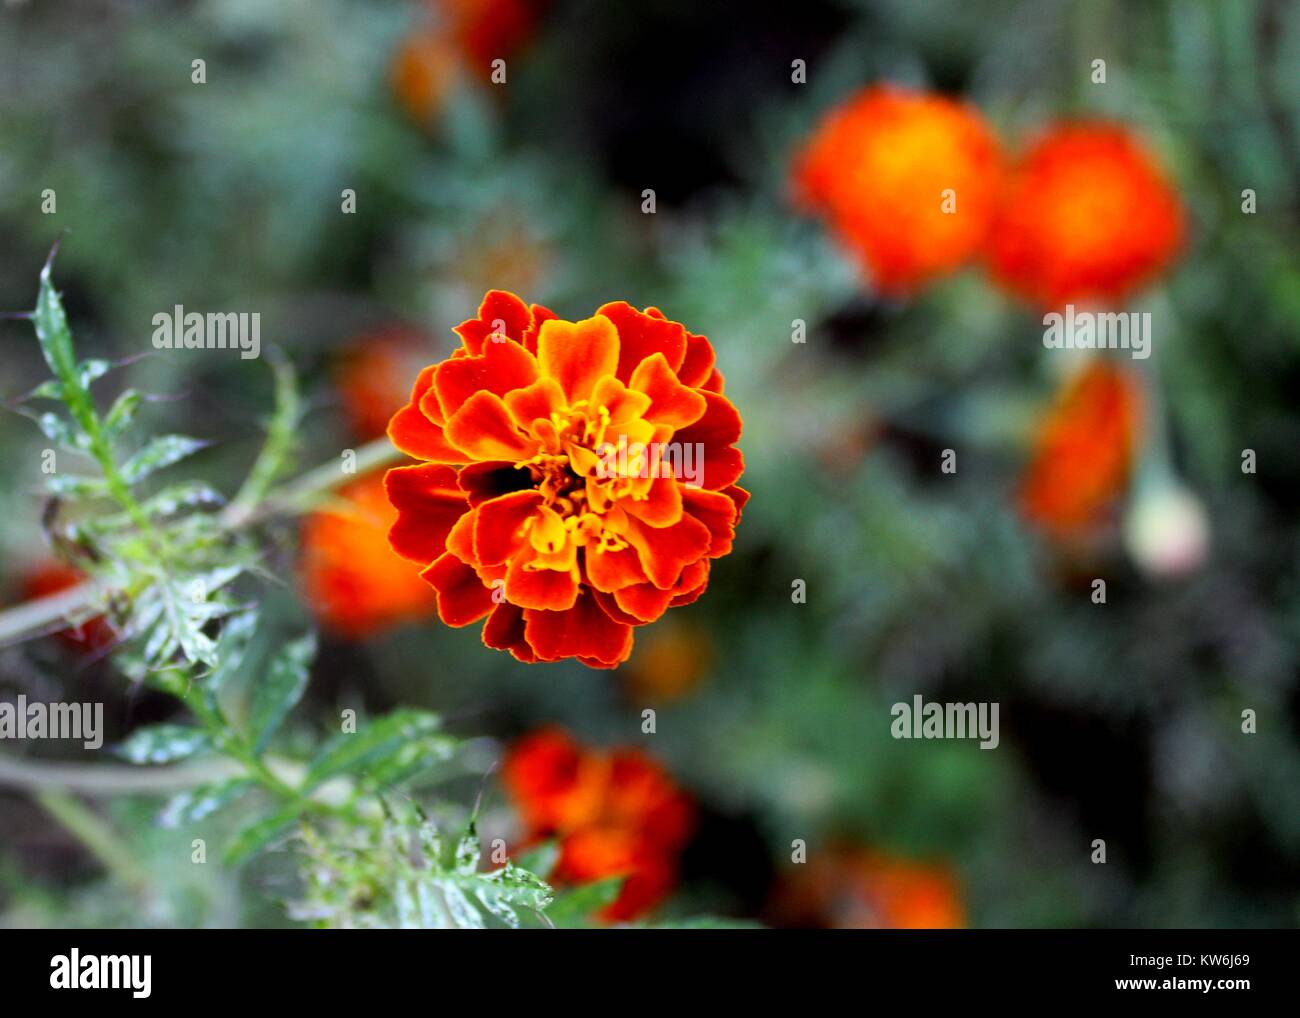 macro - close-up view of  beautiful yellow - orange color french marigold - Tagetes patula - flower - petals in a bungalow garden Stock Photo